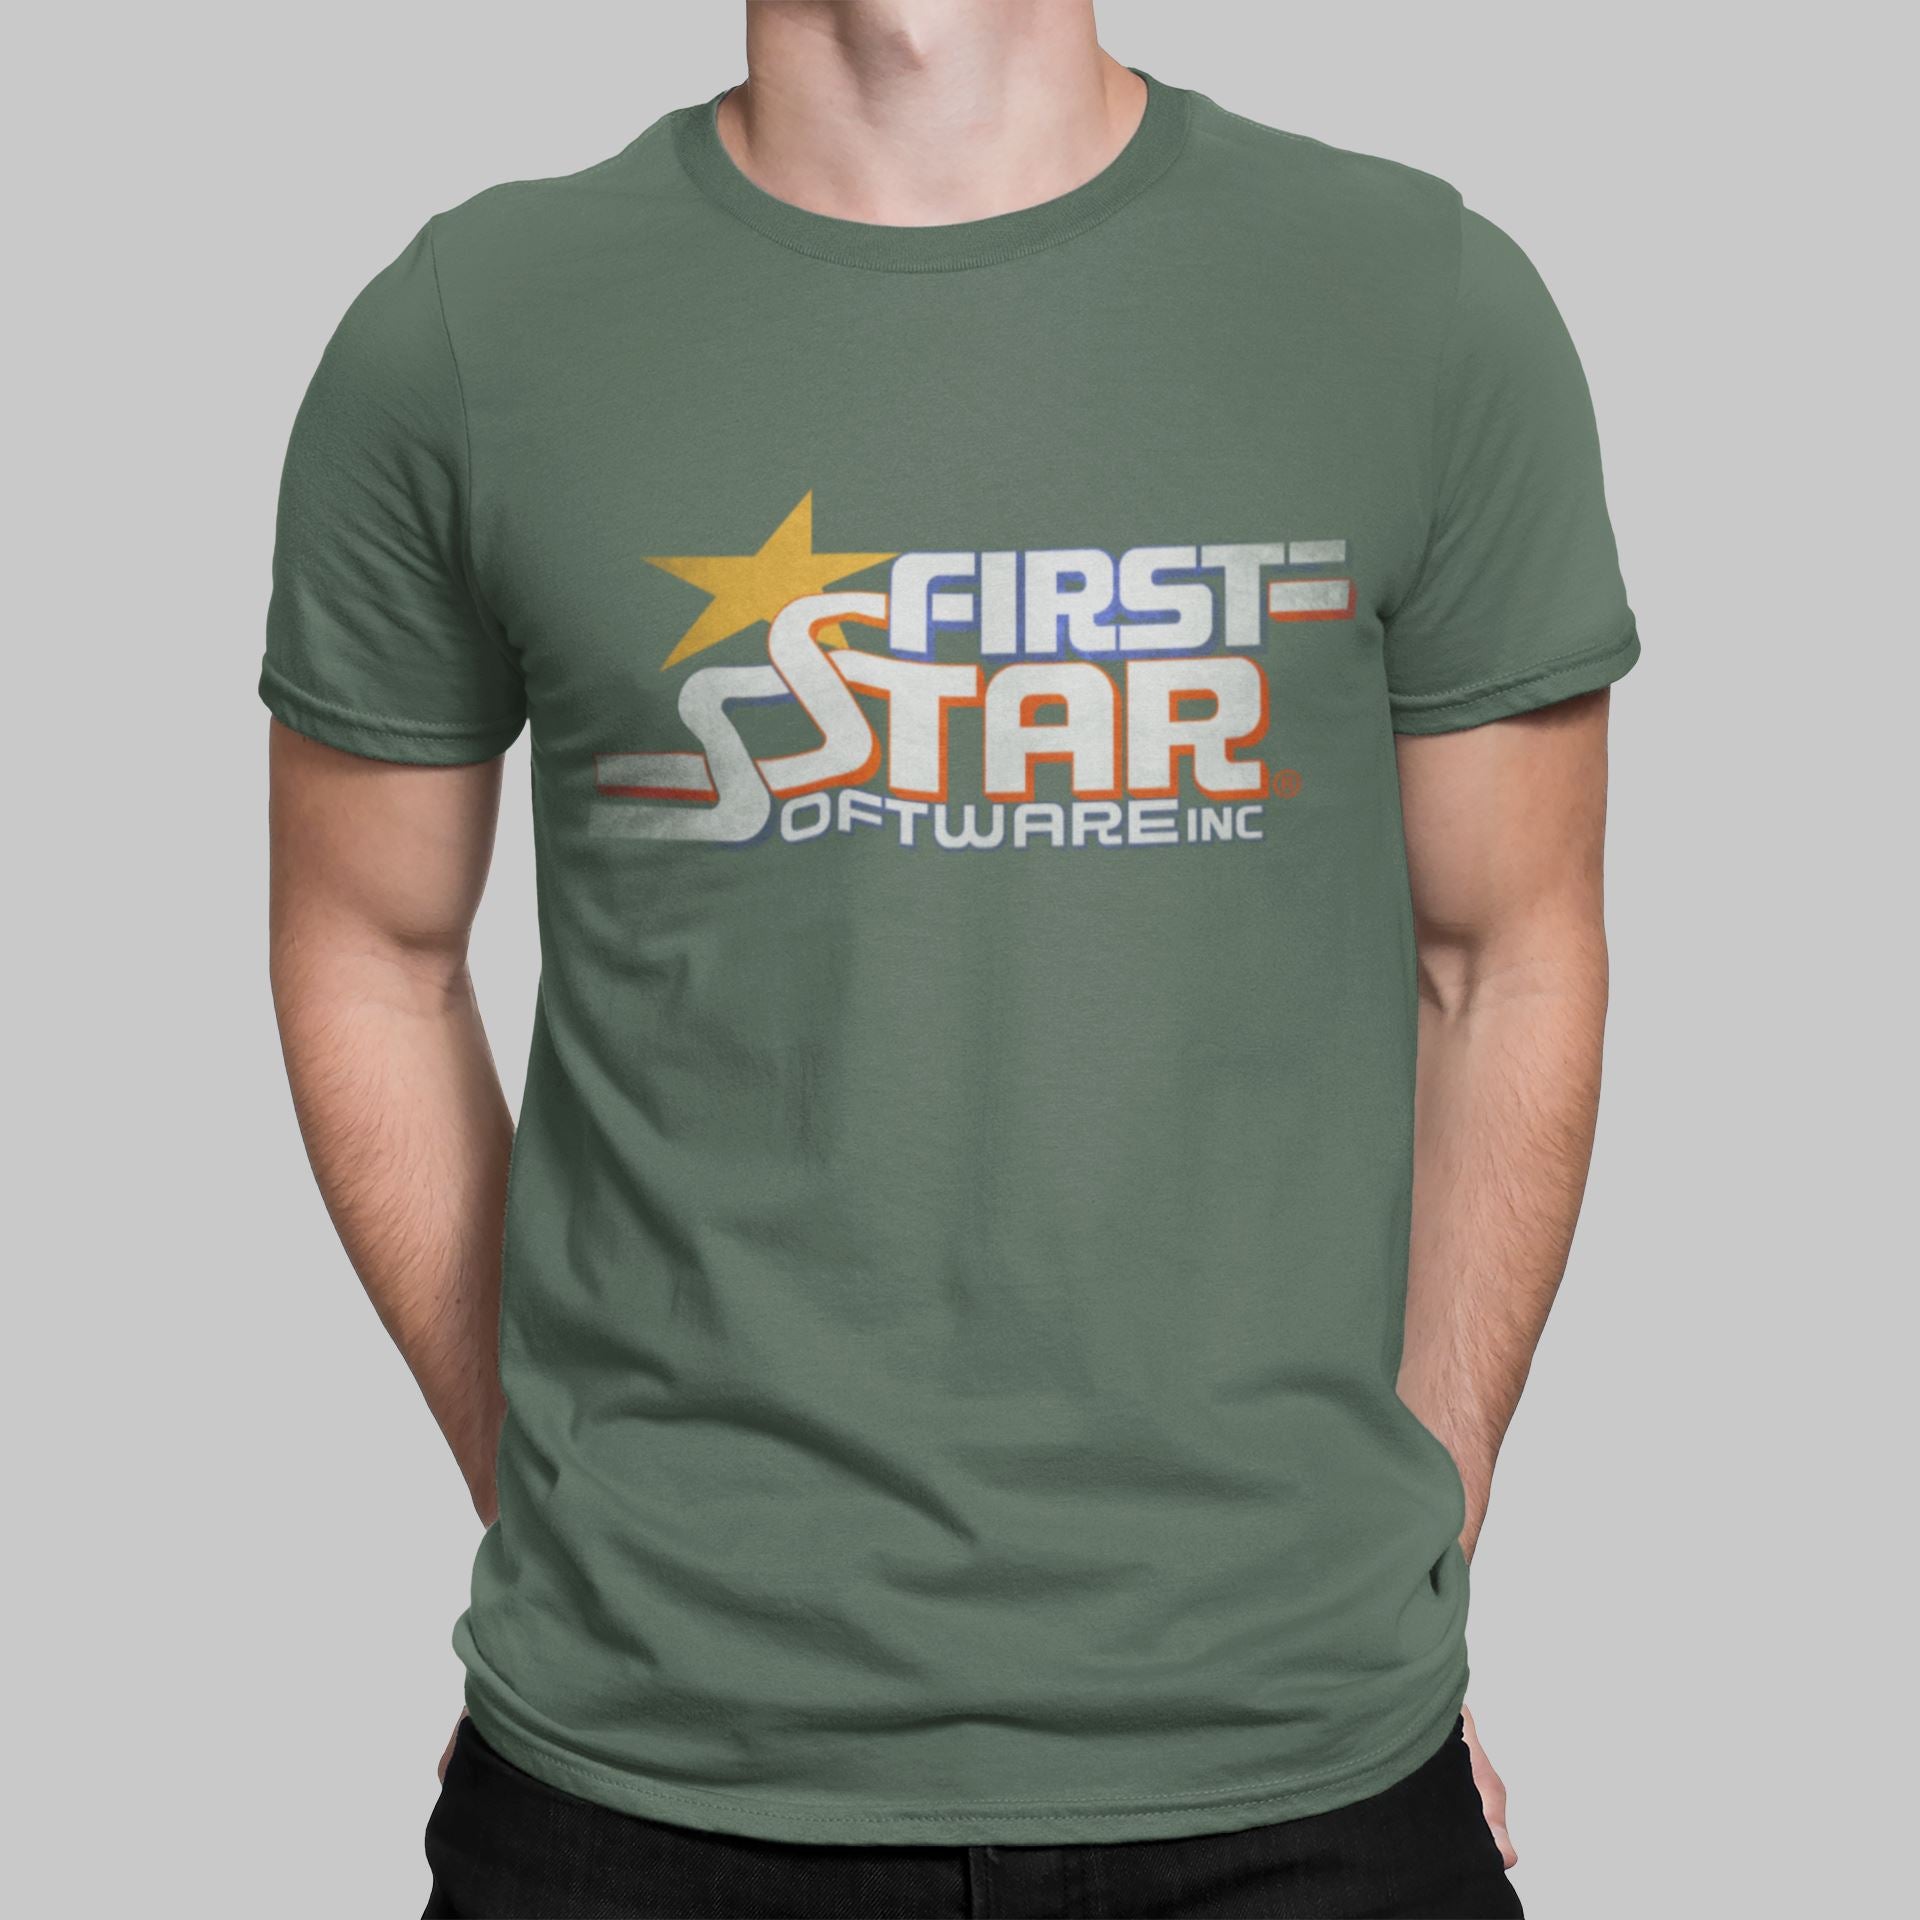 First Star Software Retro Gaming T-Shirt T-Shirt Seven Squared Small 34-36" Military Green 